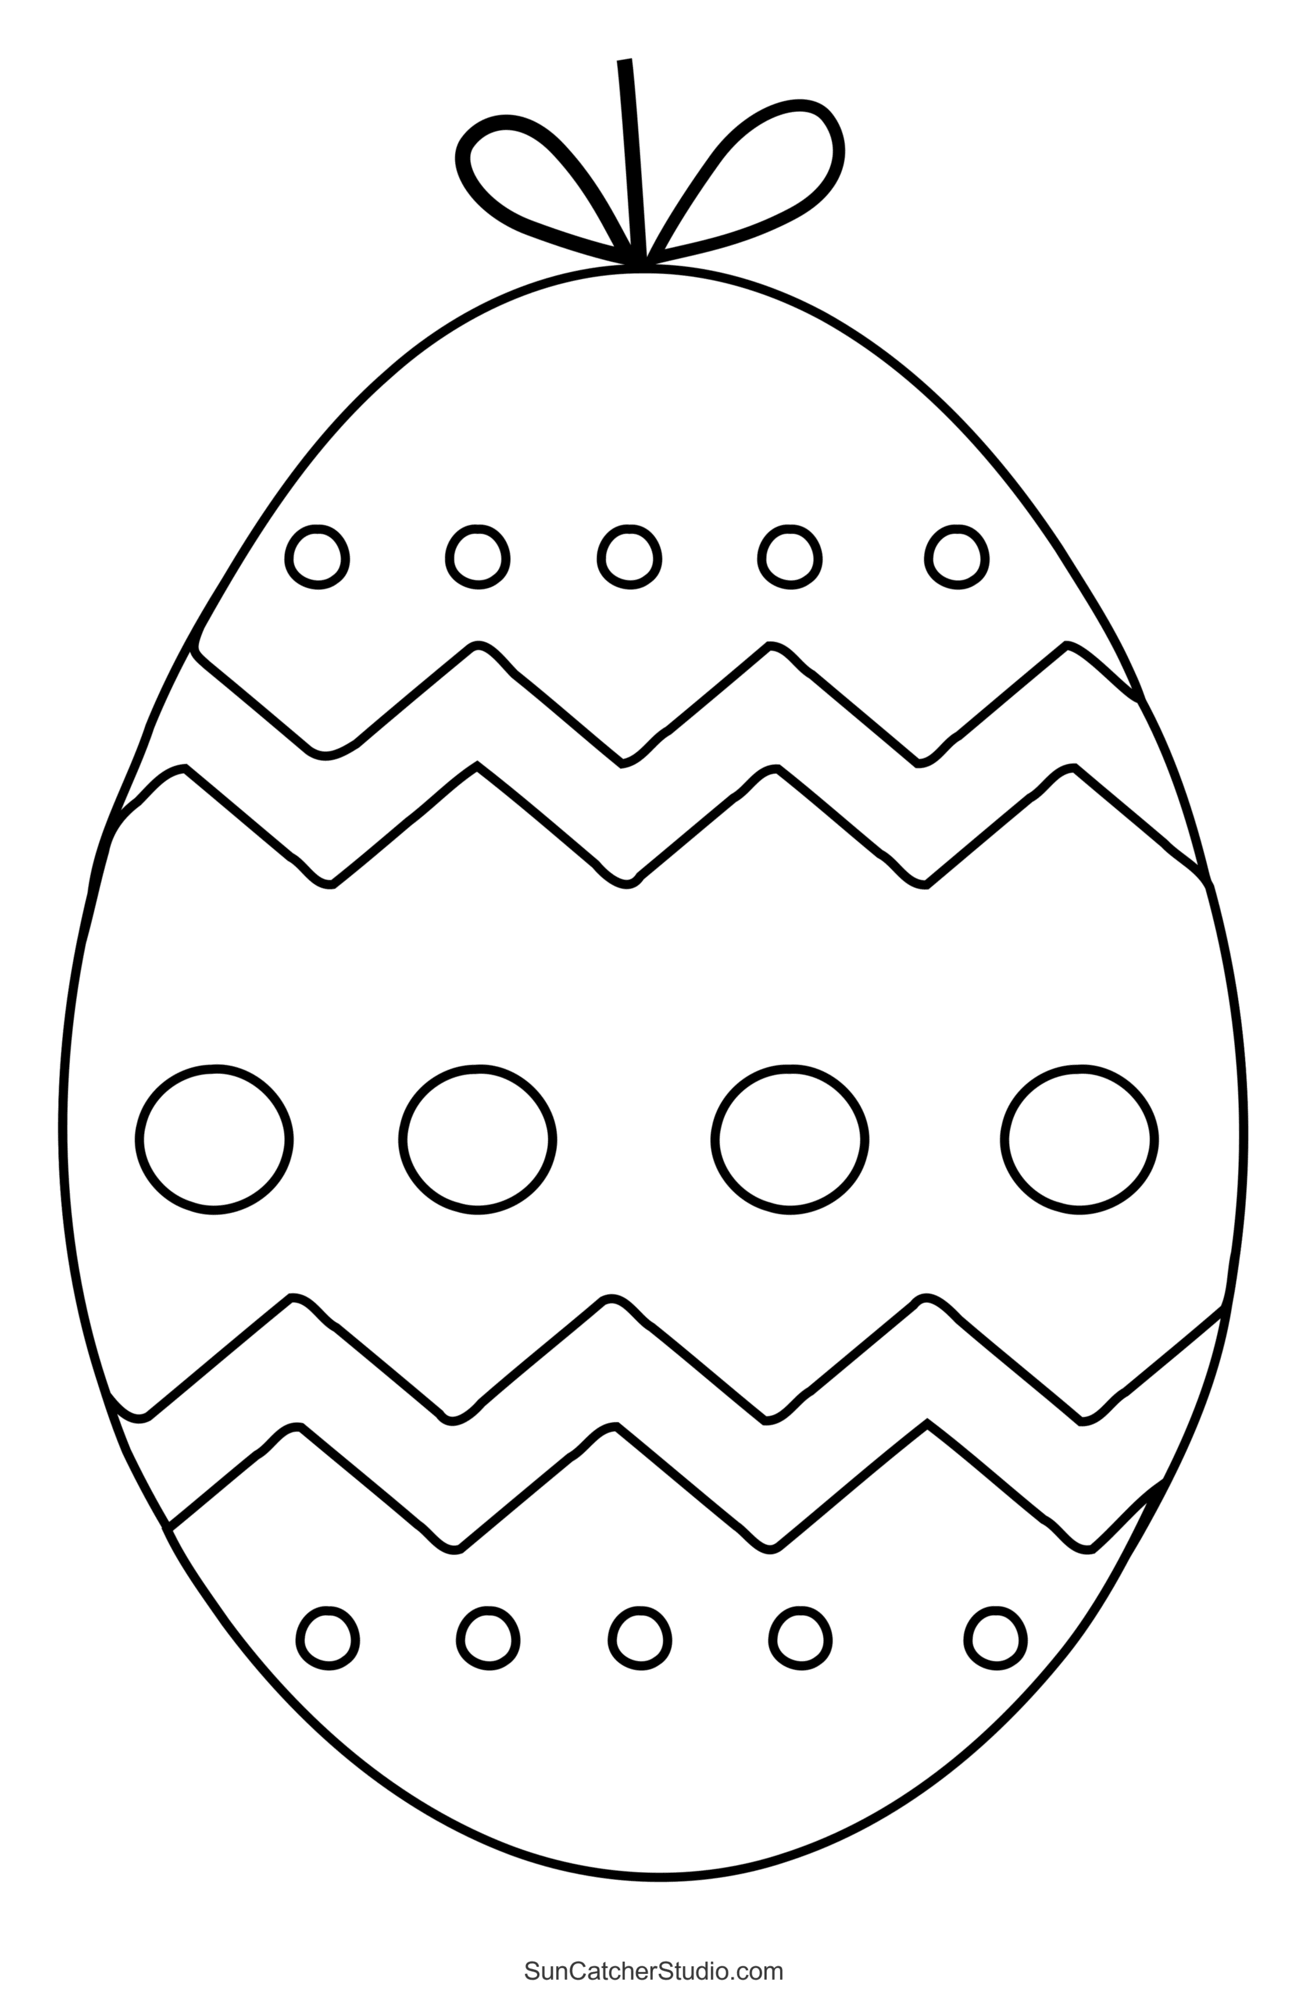 Easter Clip Art Patterns (Egg and Bunny Stencils) – DIY Projects, Patterns,  Monograms, Designs, Templates